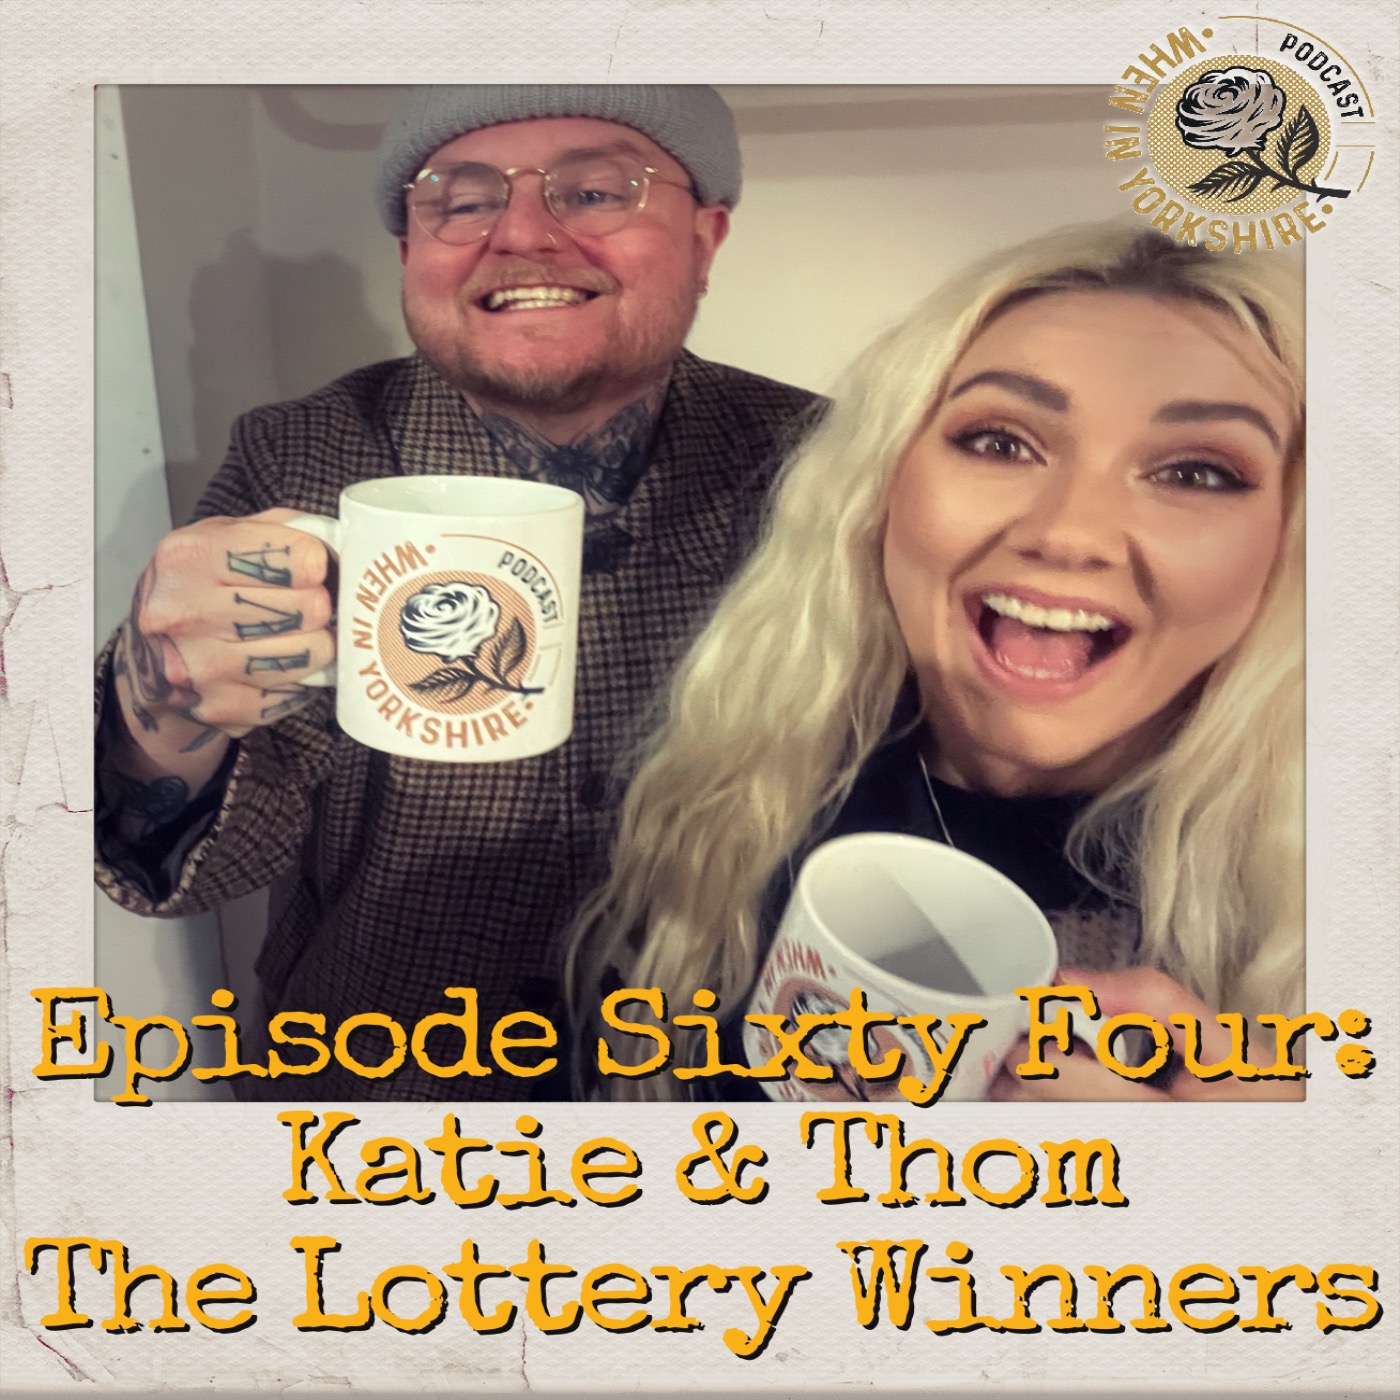 Episode Sixty Four: Katie & Thom - The Lottery Winners